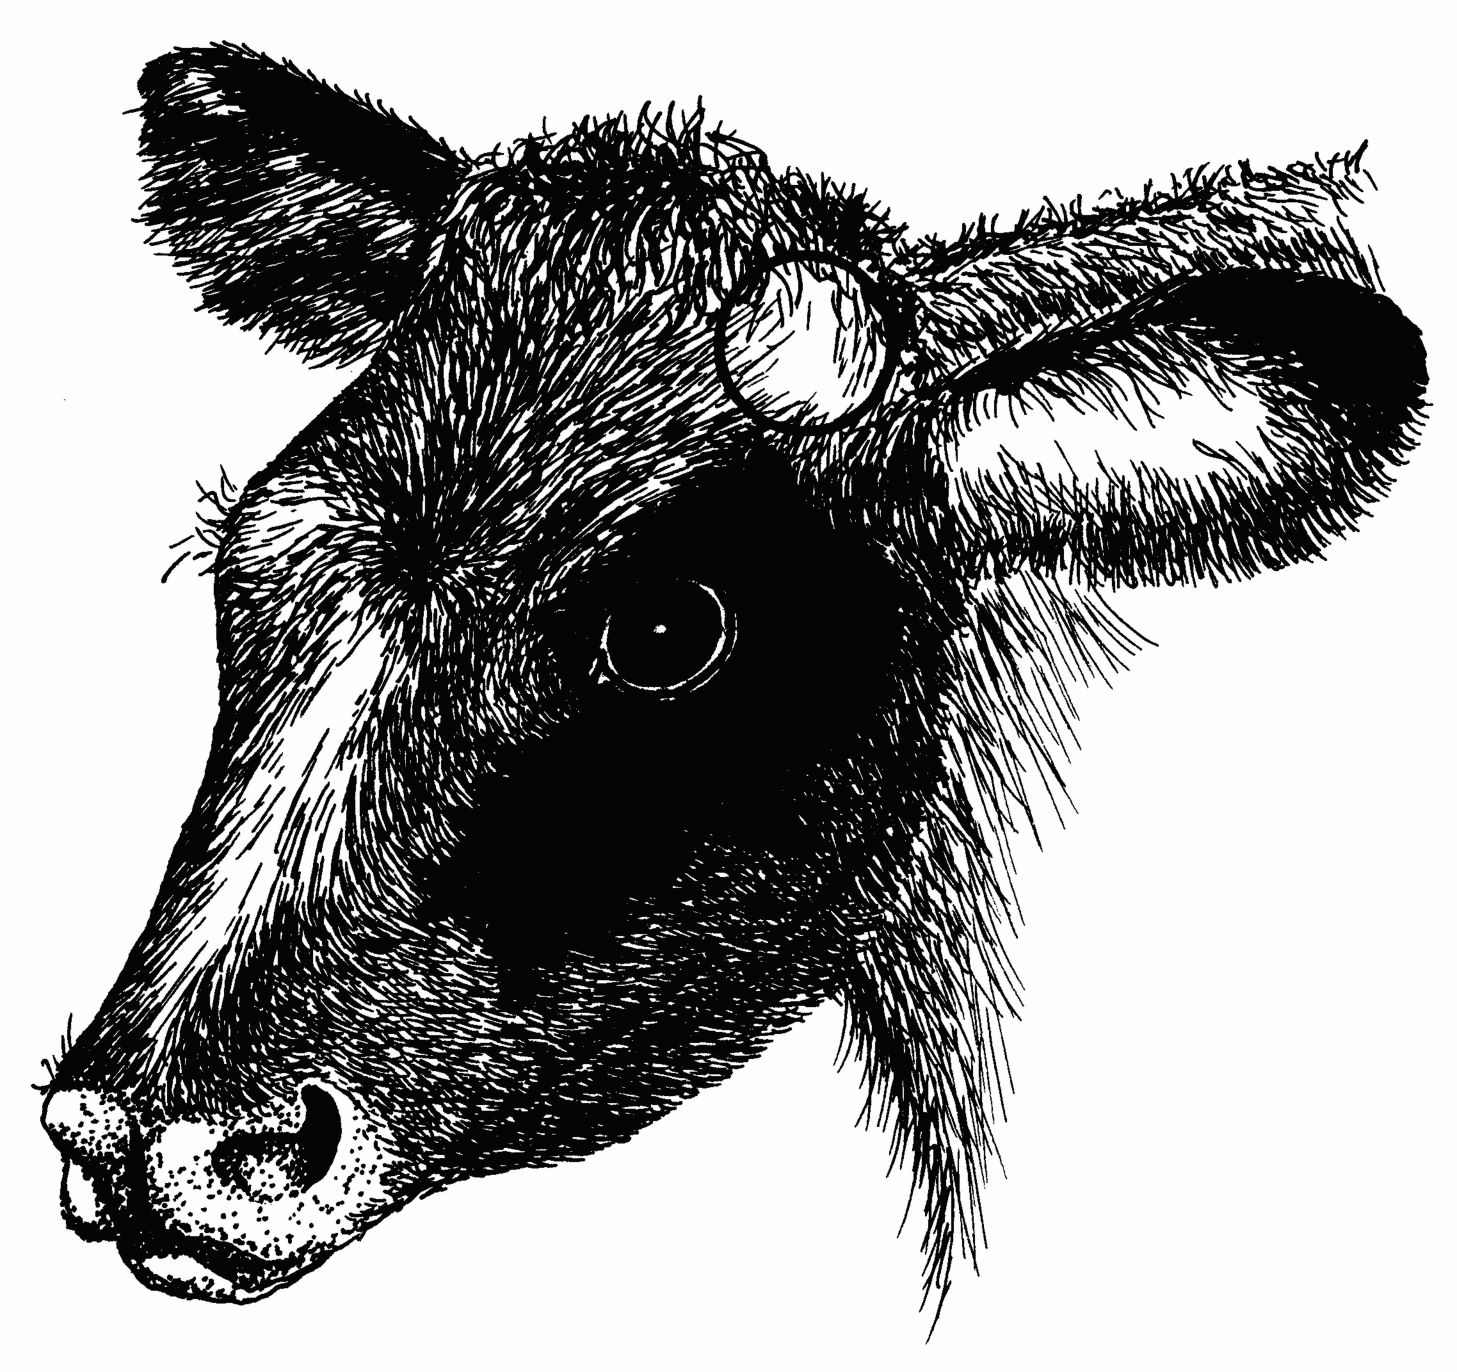 Calf head graphic with circle drawn at the base of the ear.